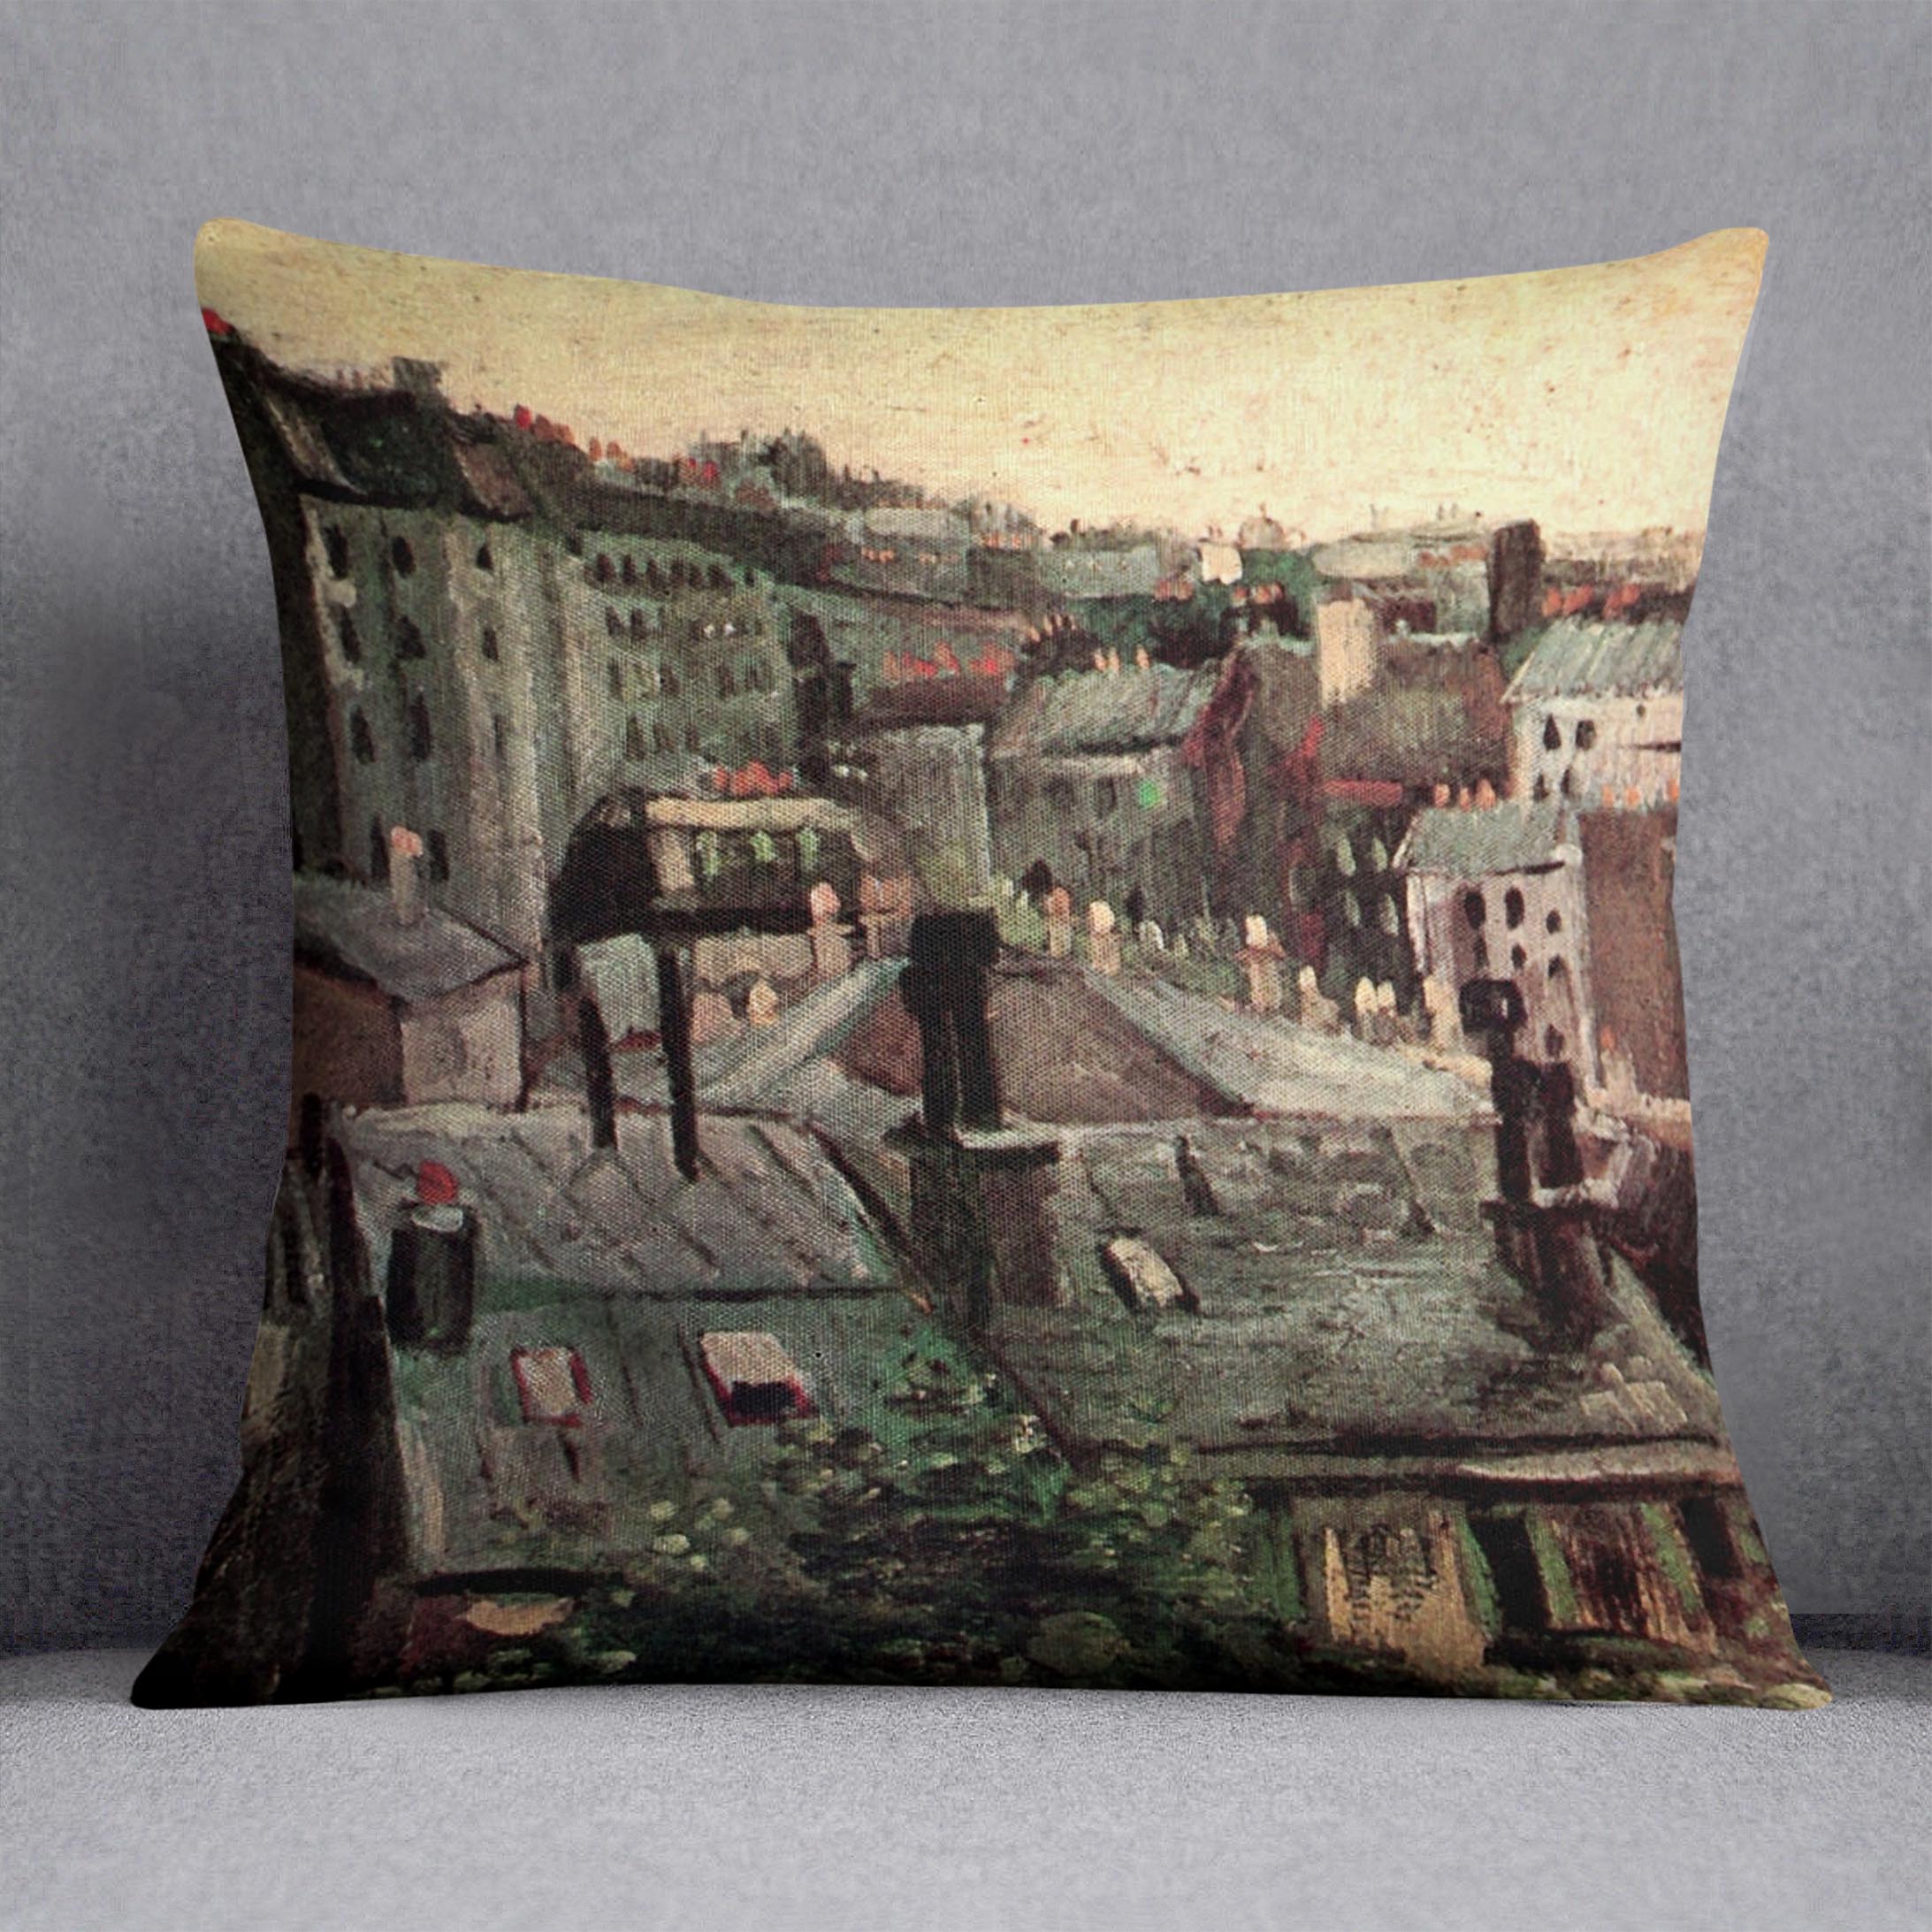 View of Roofs and Backs of Houses by Van Gogh Cushion